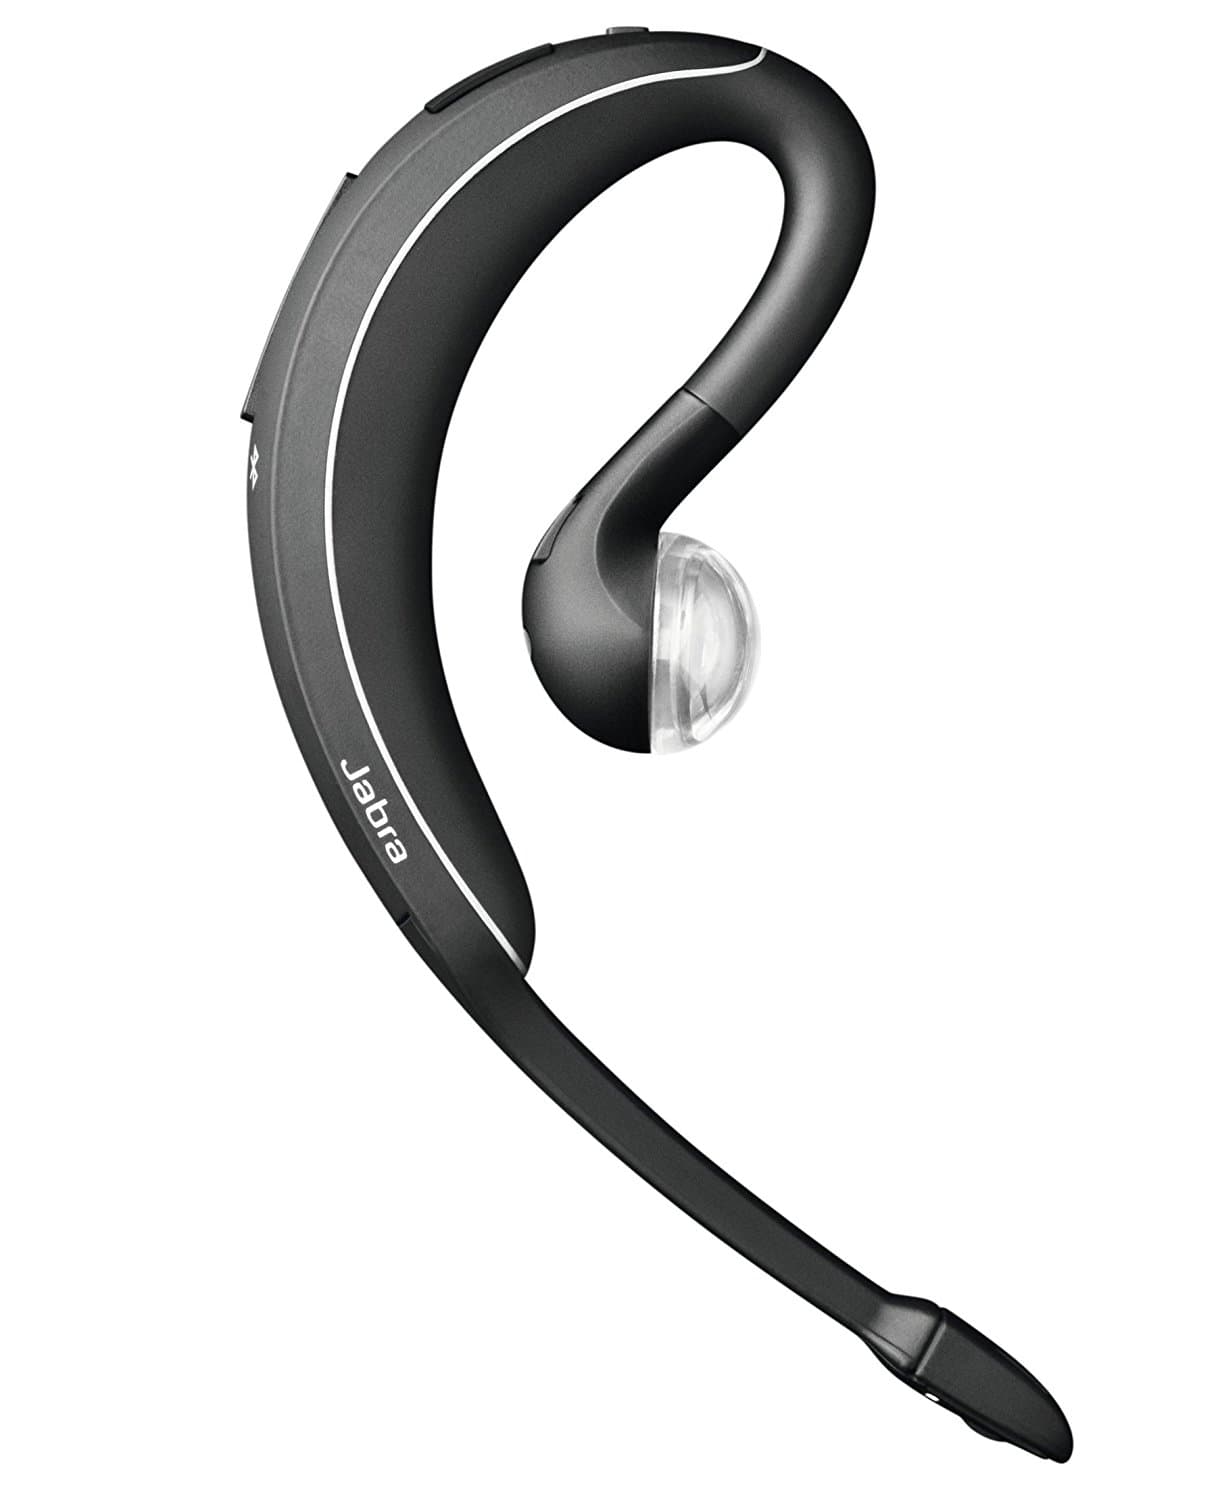 top bluetooth headsets